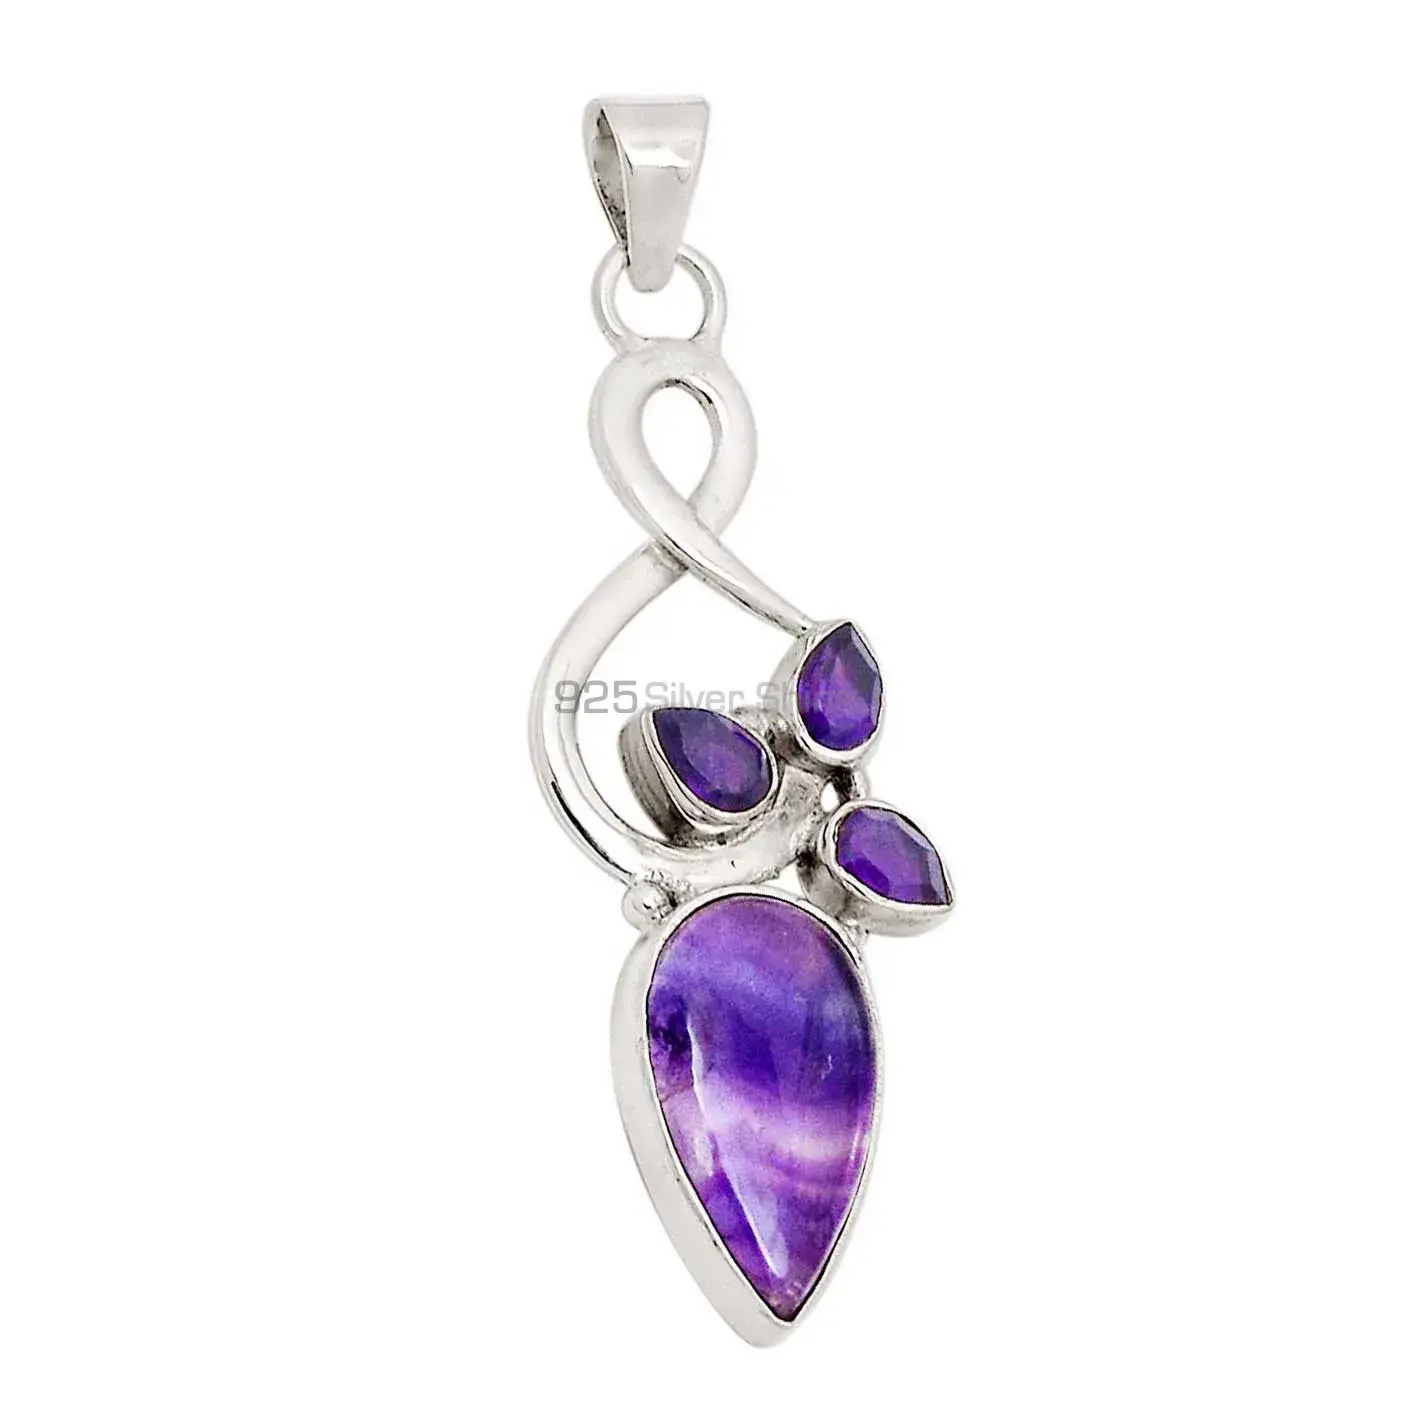 Top Quality 925 Solid Silver Pendants Exporters In Multi Gemstone Jewelry 925SP109-2_0